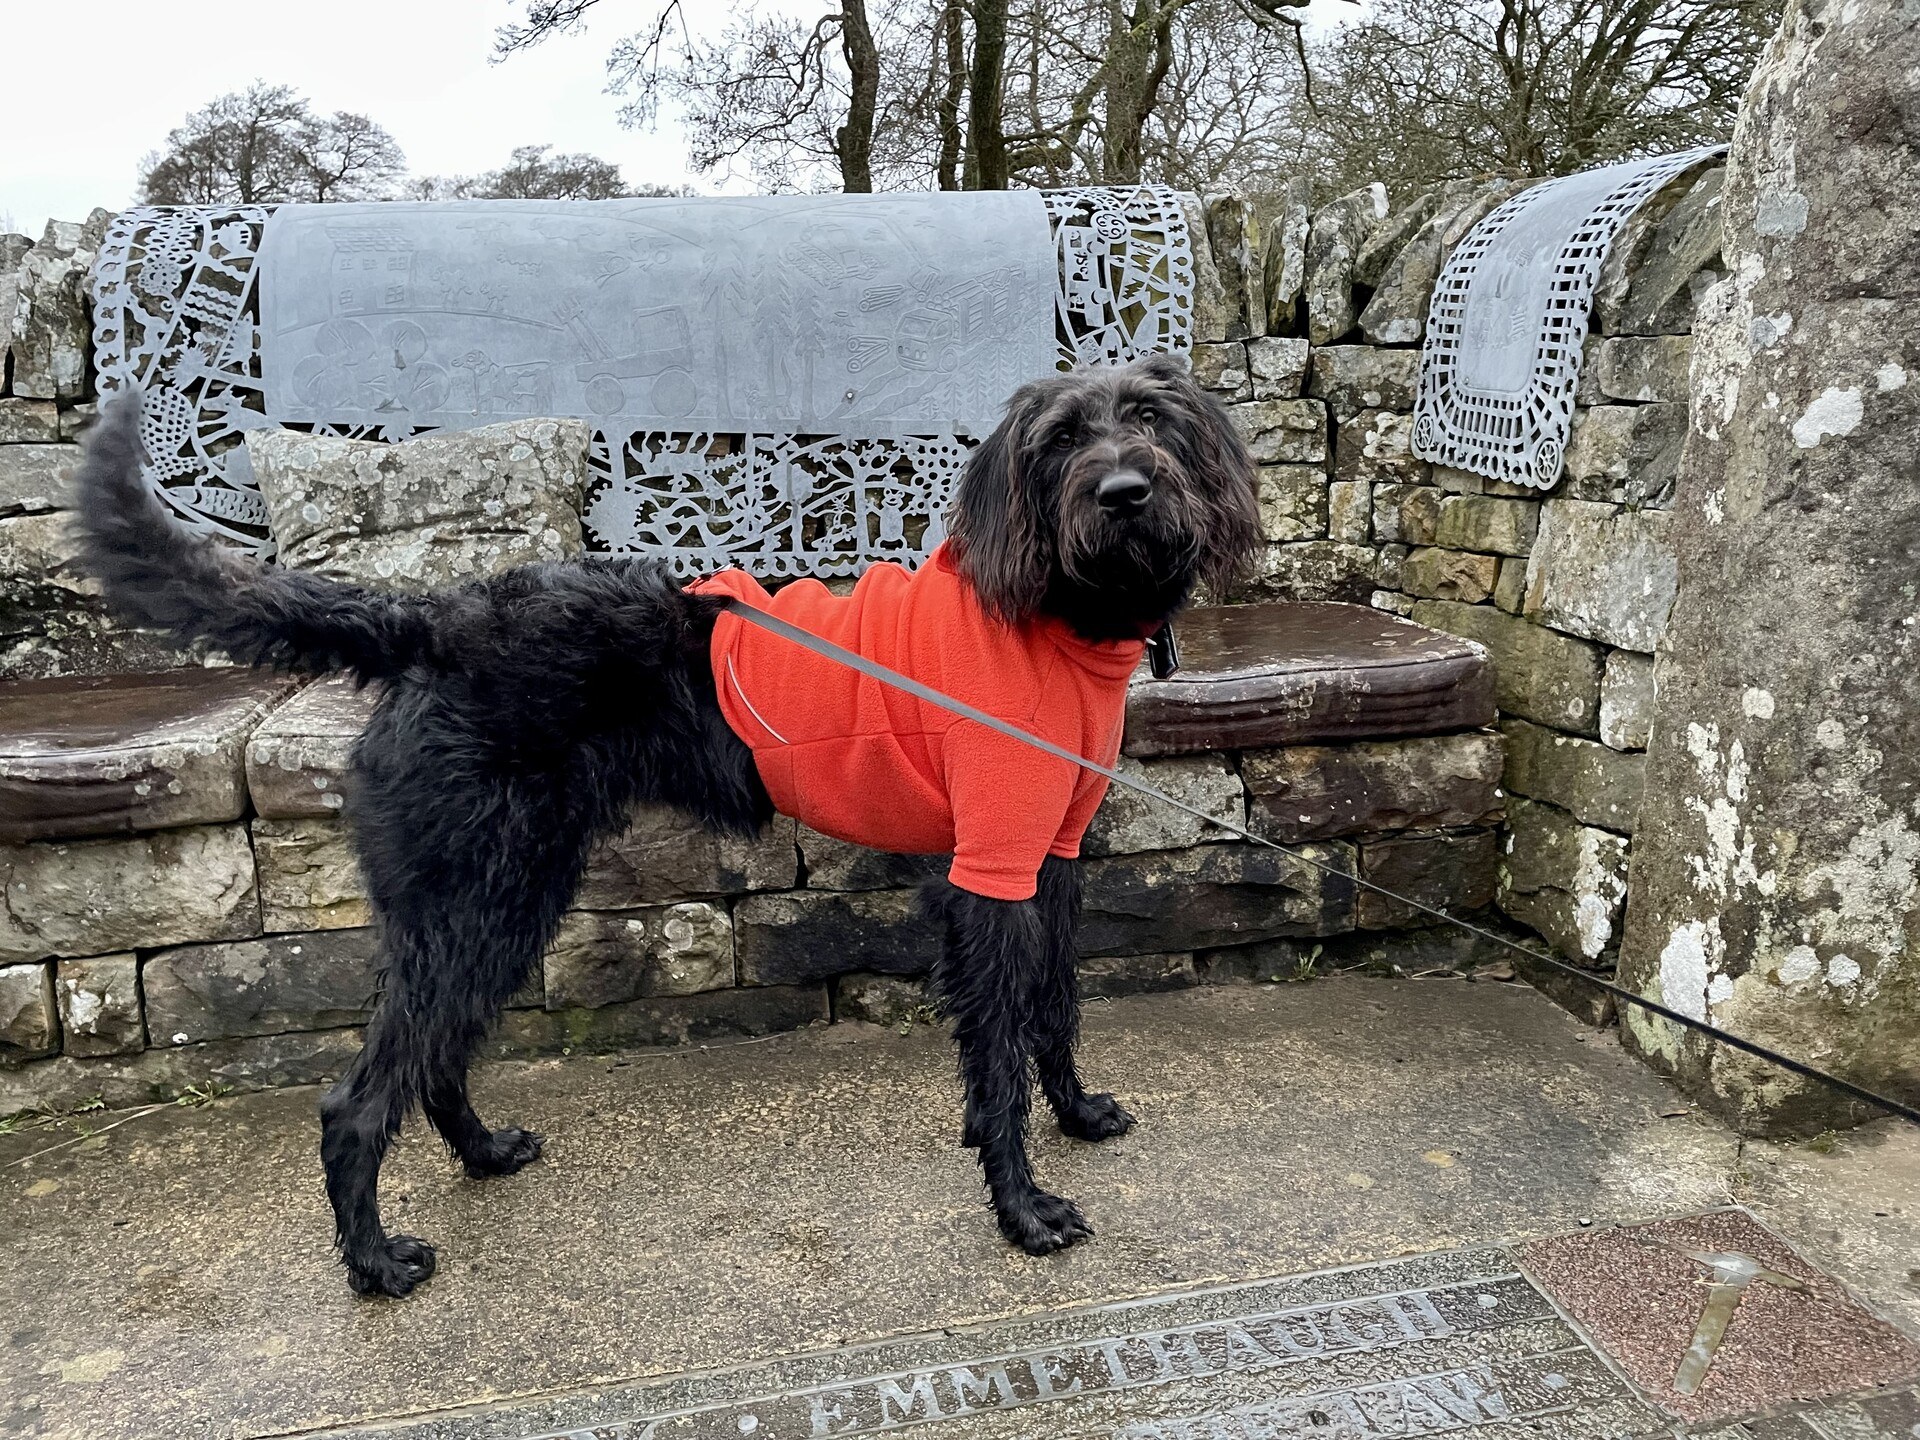 Ghyll wearing an orange dog coat, standing by a settee sculpted from stone